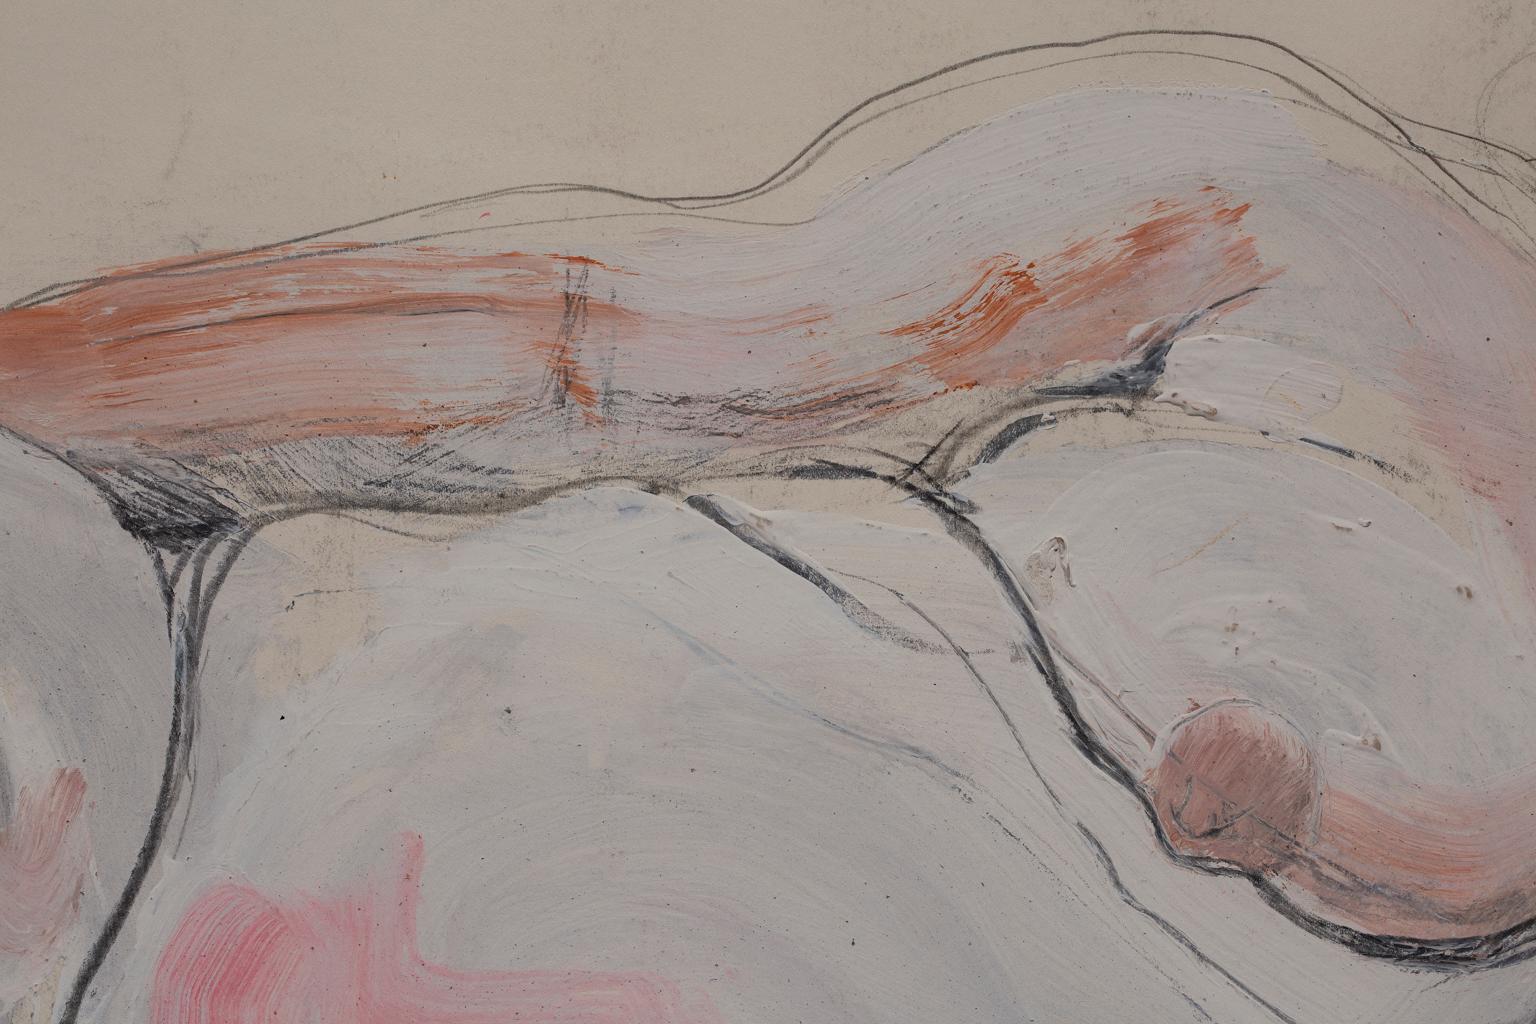 This acrylic and graphite on paper from the seminal artist Artis Lane is one of the many model paintings from her long and illustrious career. The subject is a large woman, similar to the Venus in Willendorf, lying in repose. Artis Lane, in her many